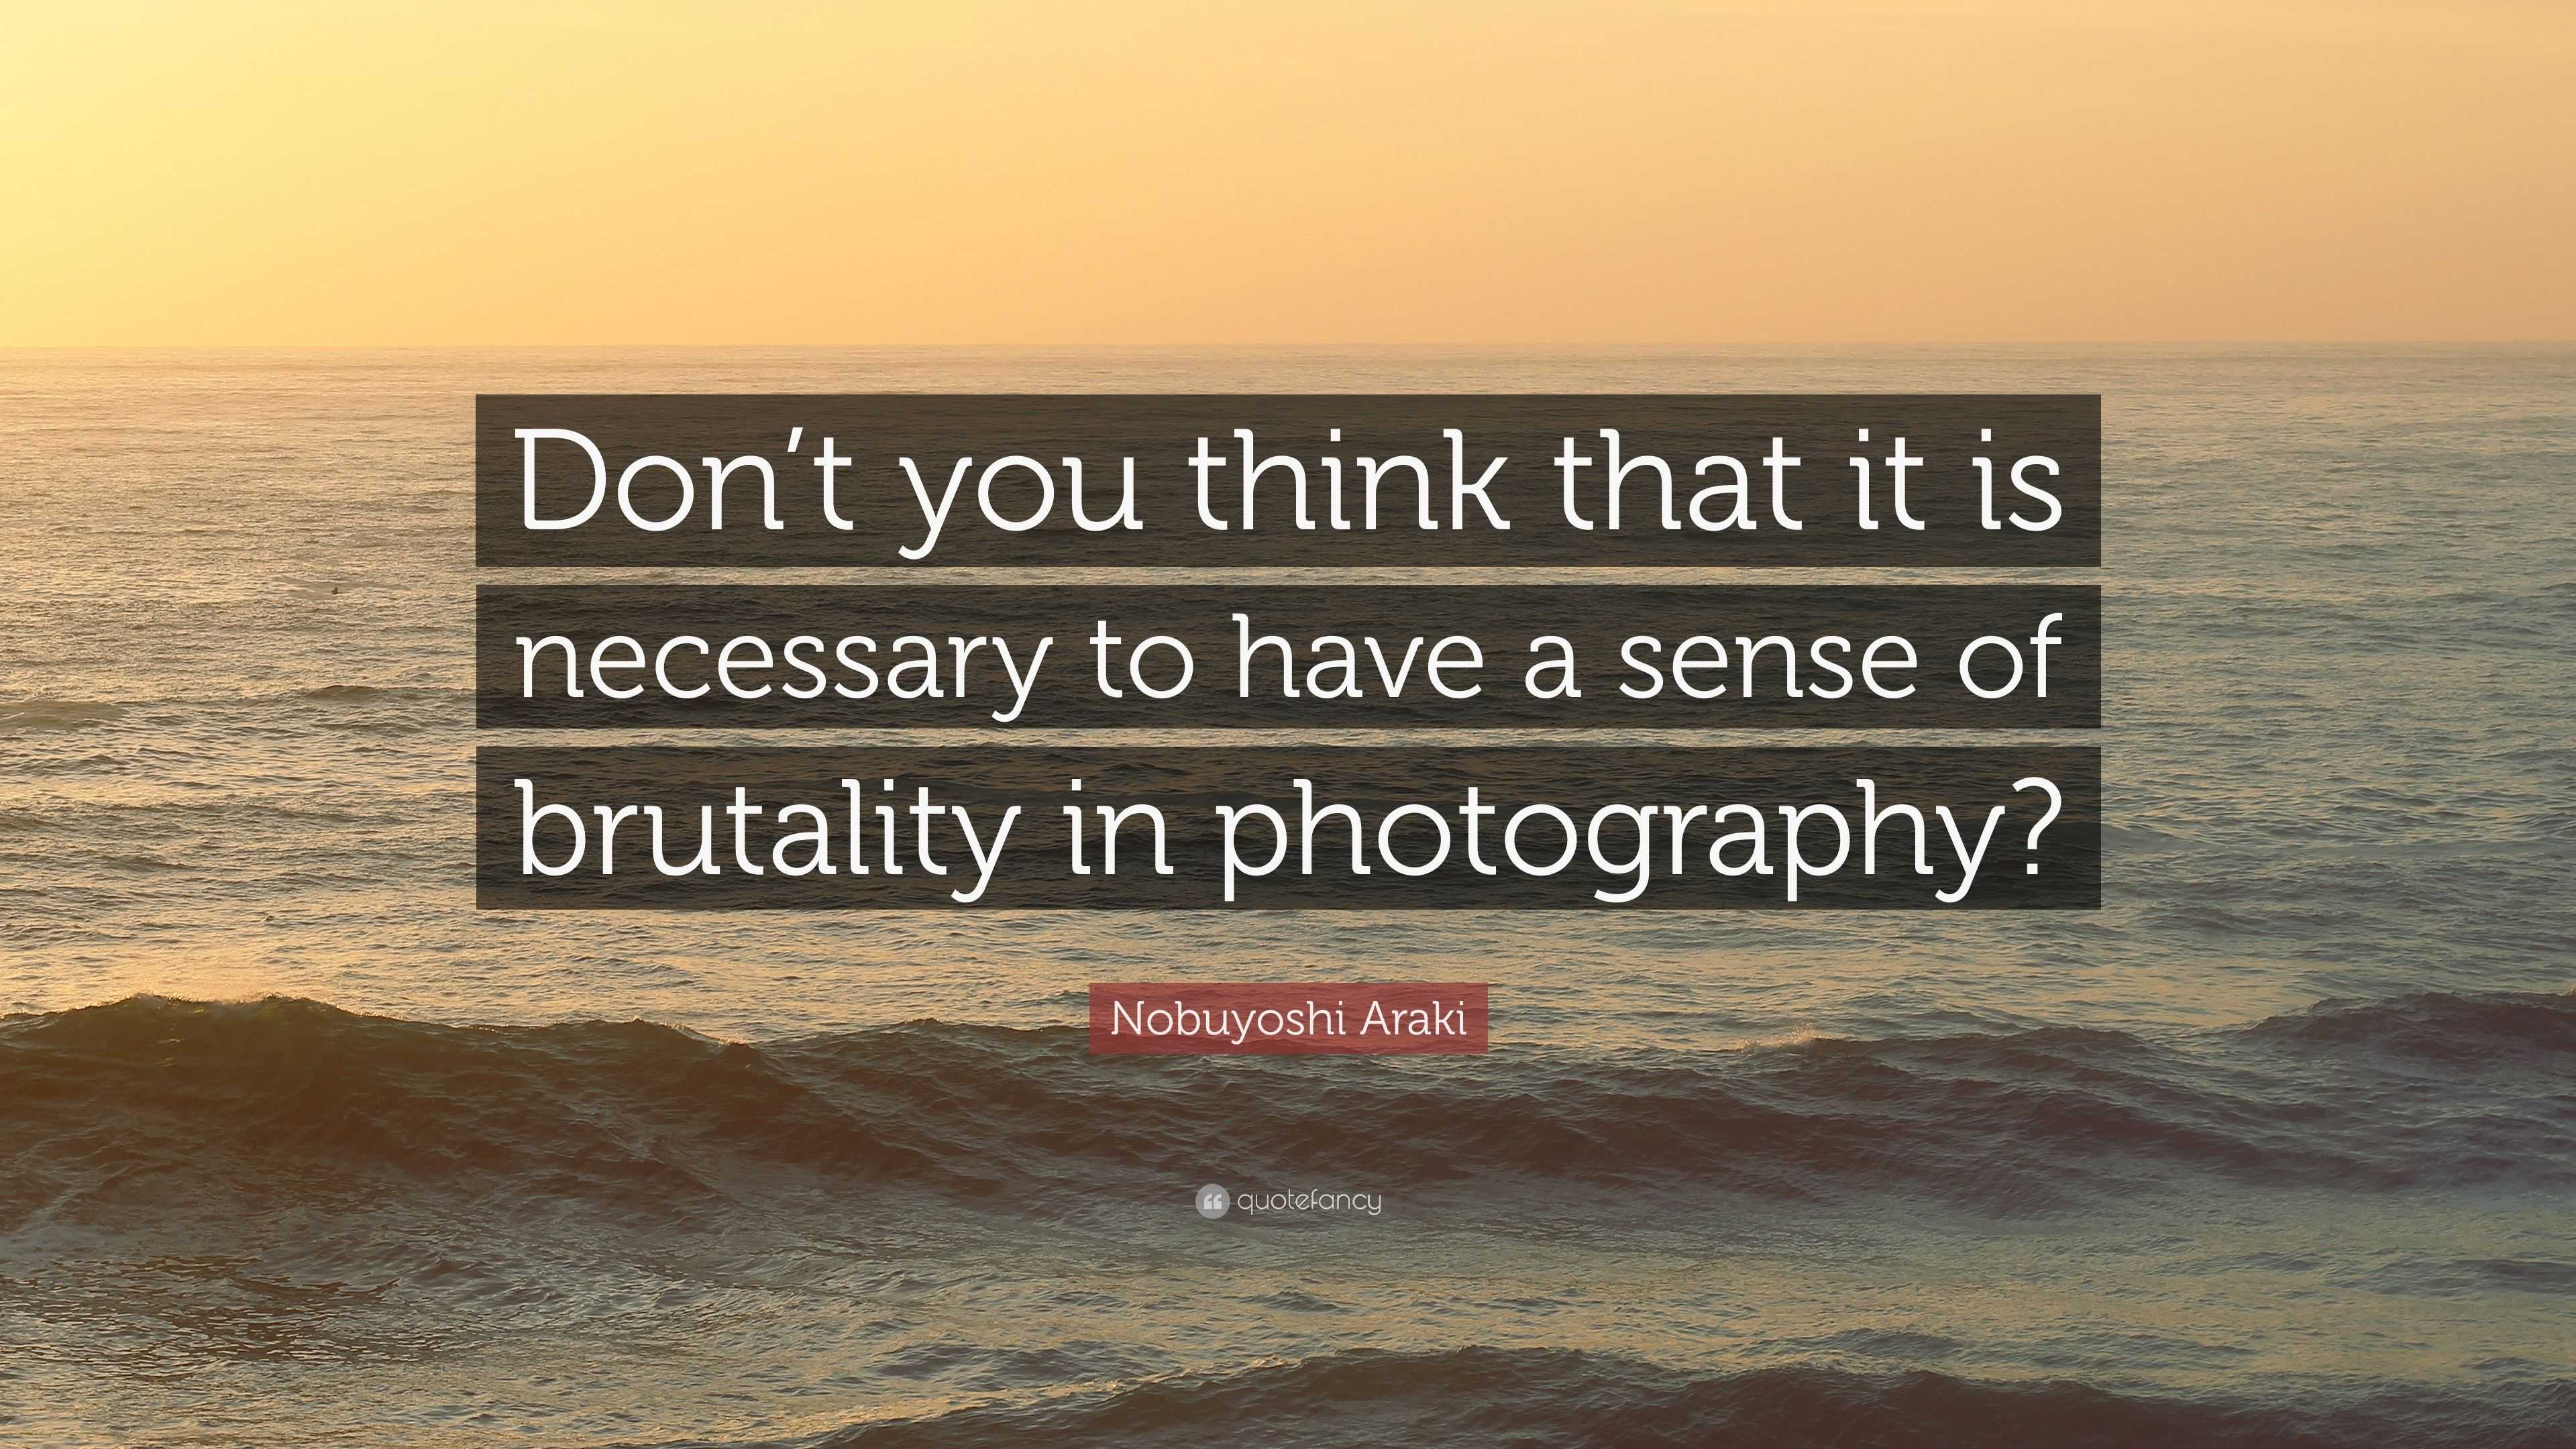 Nobuyoshi Araki Quote: “Don’t you think that it is necessary to have a ...